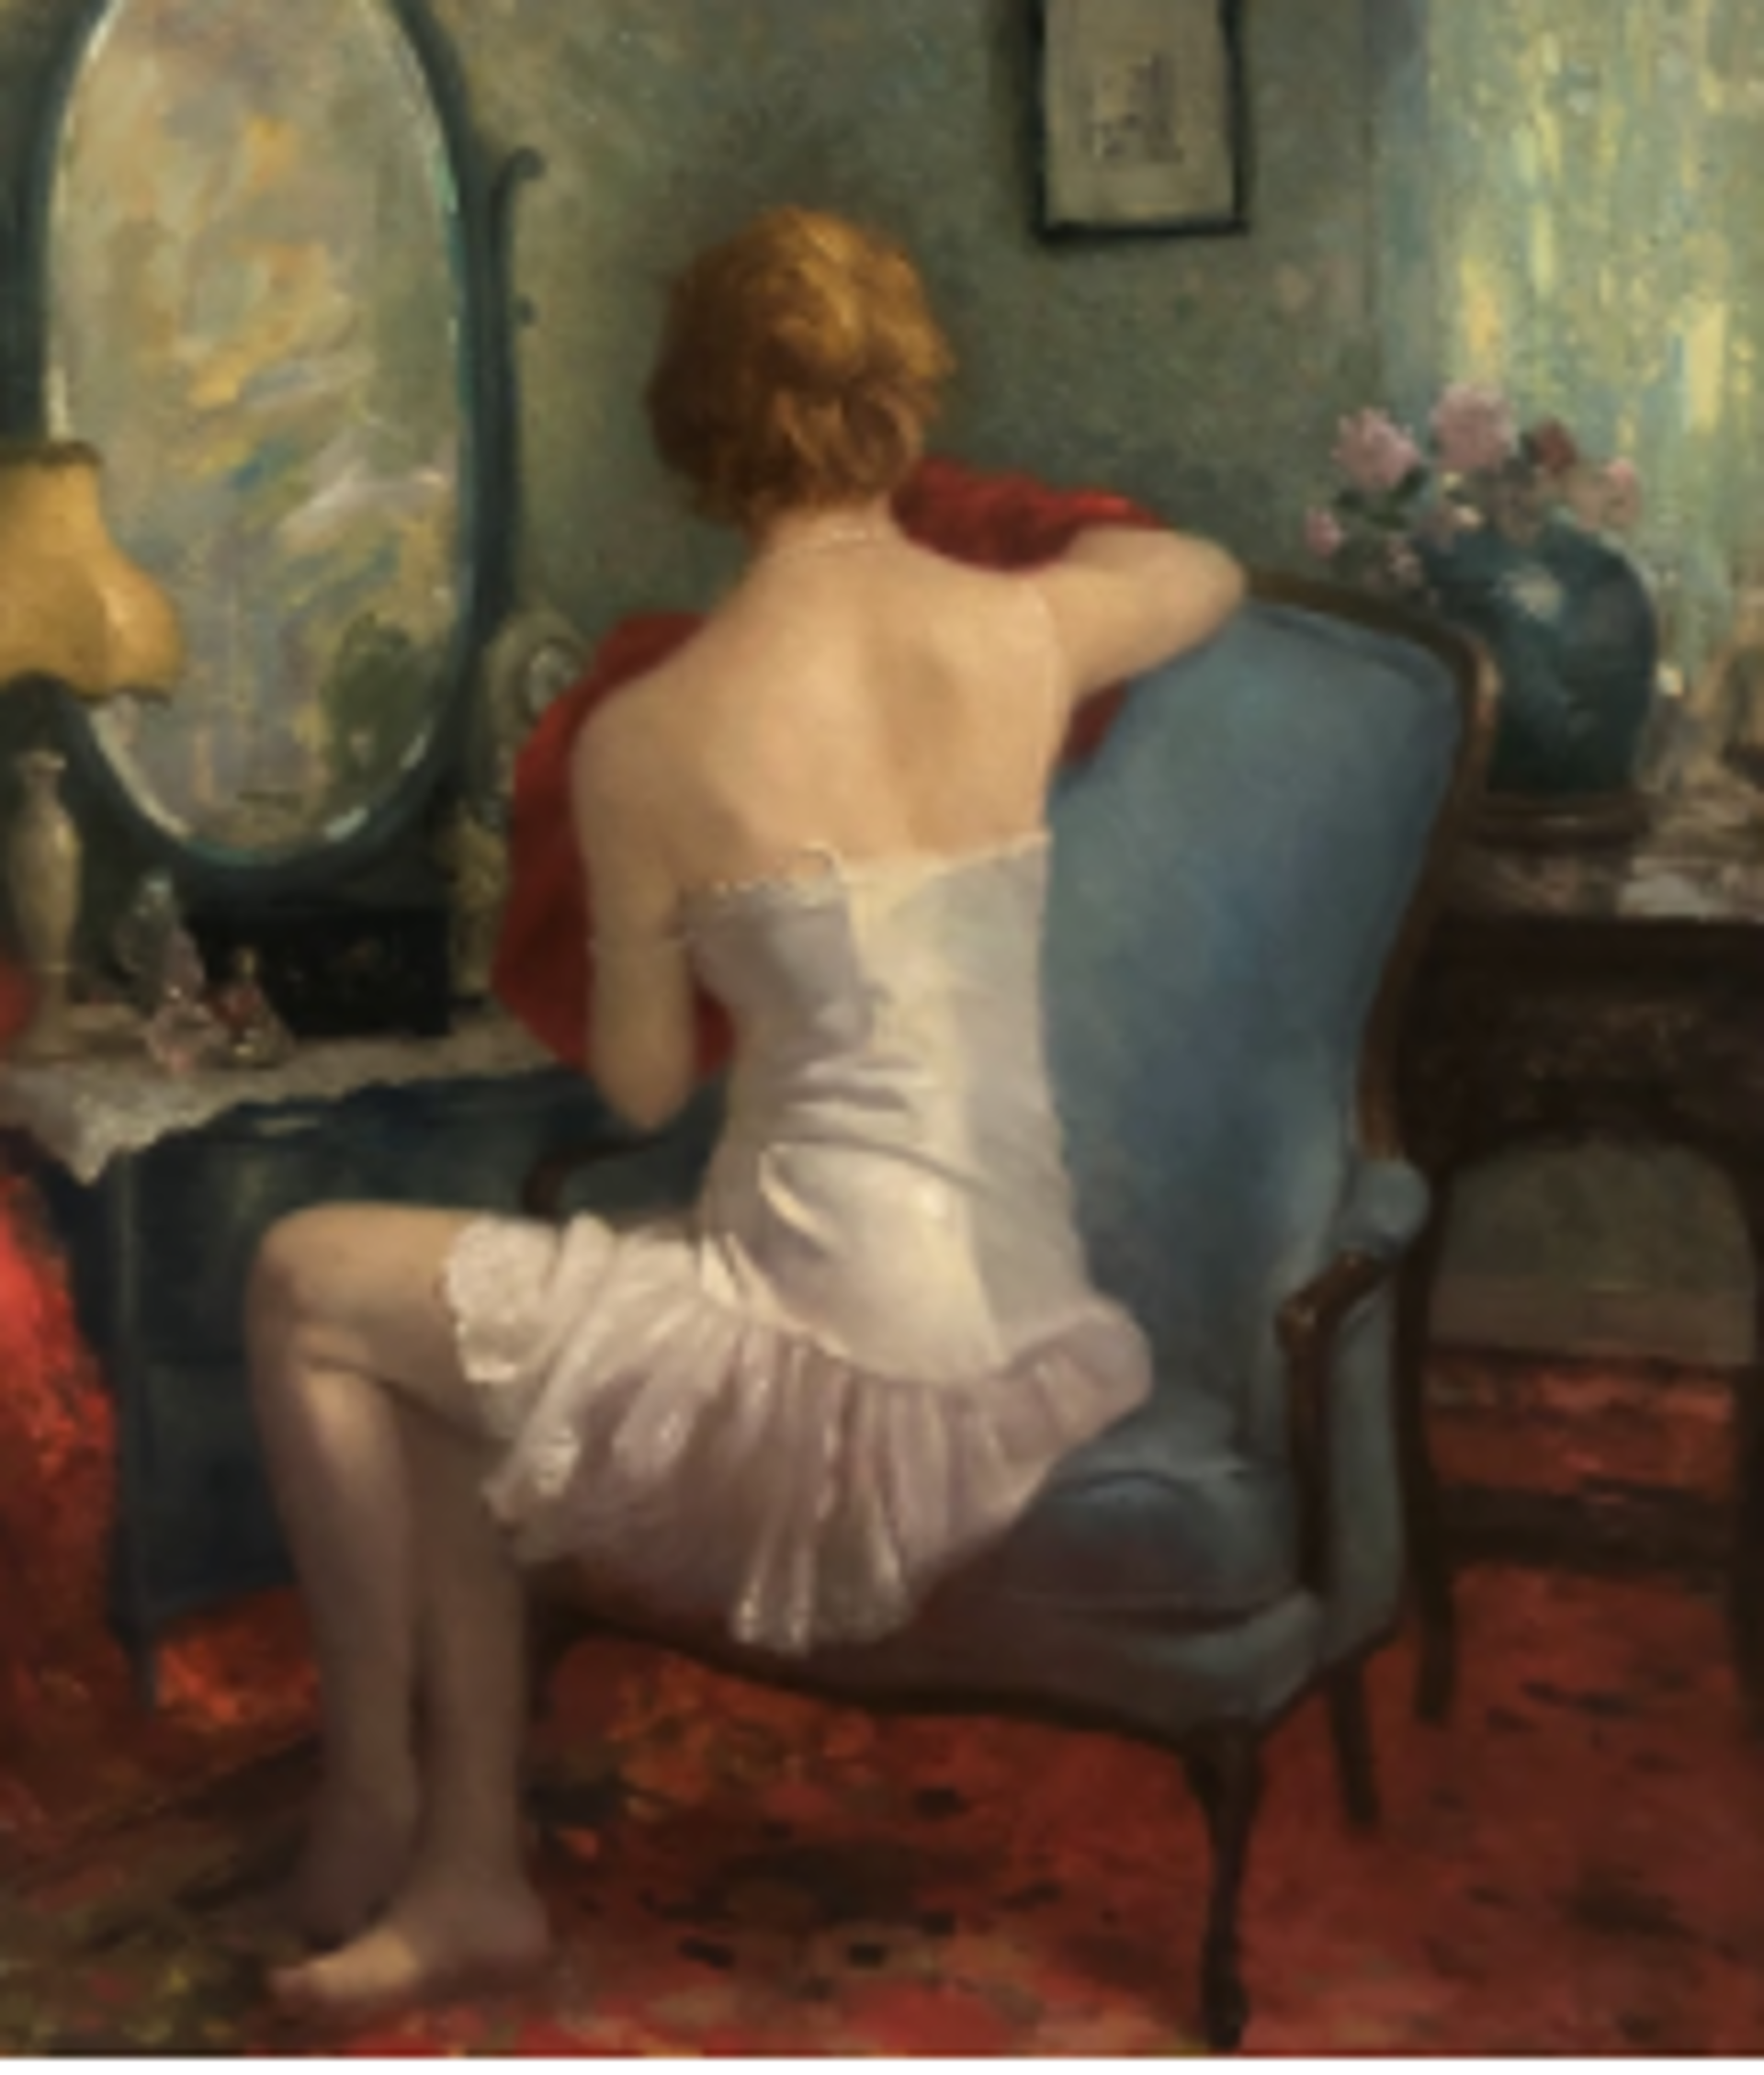 At the Dressing Table by David Hatfield